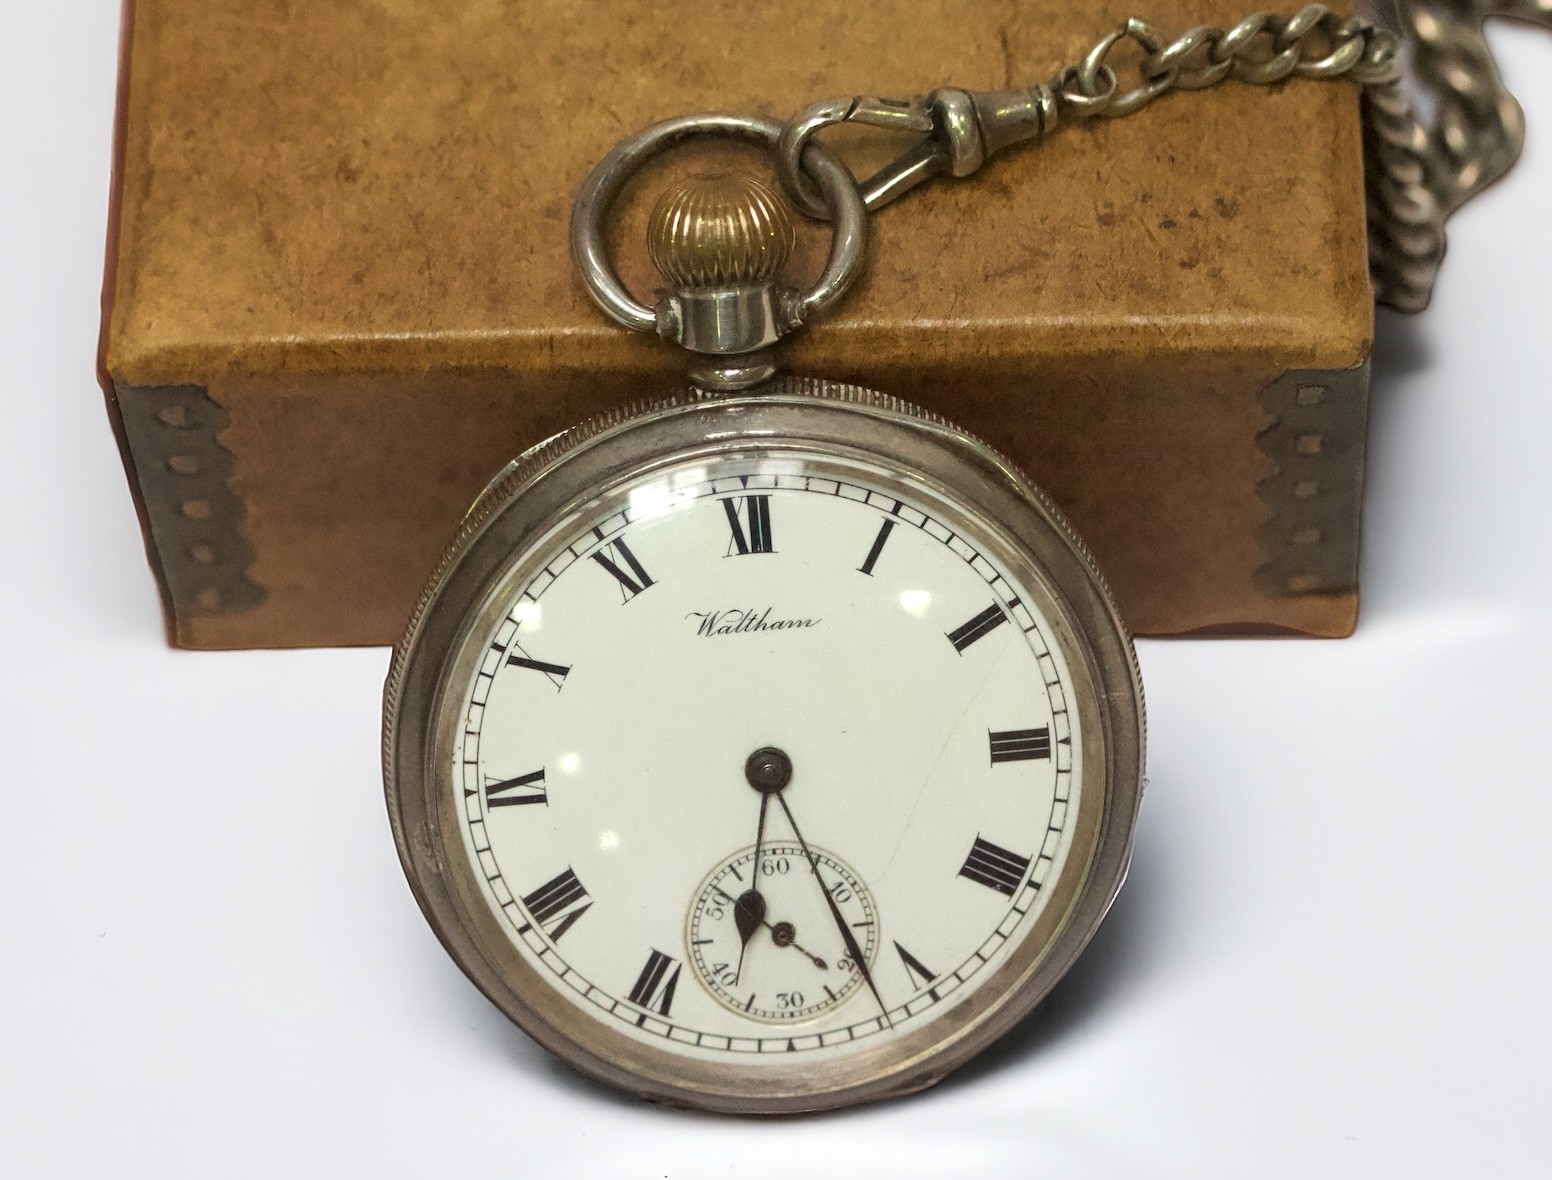 A silver-cased open face pocket watch by Waltham, the white enamel dial with Roman numerals denoting